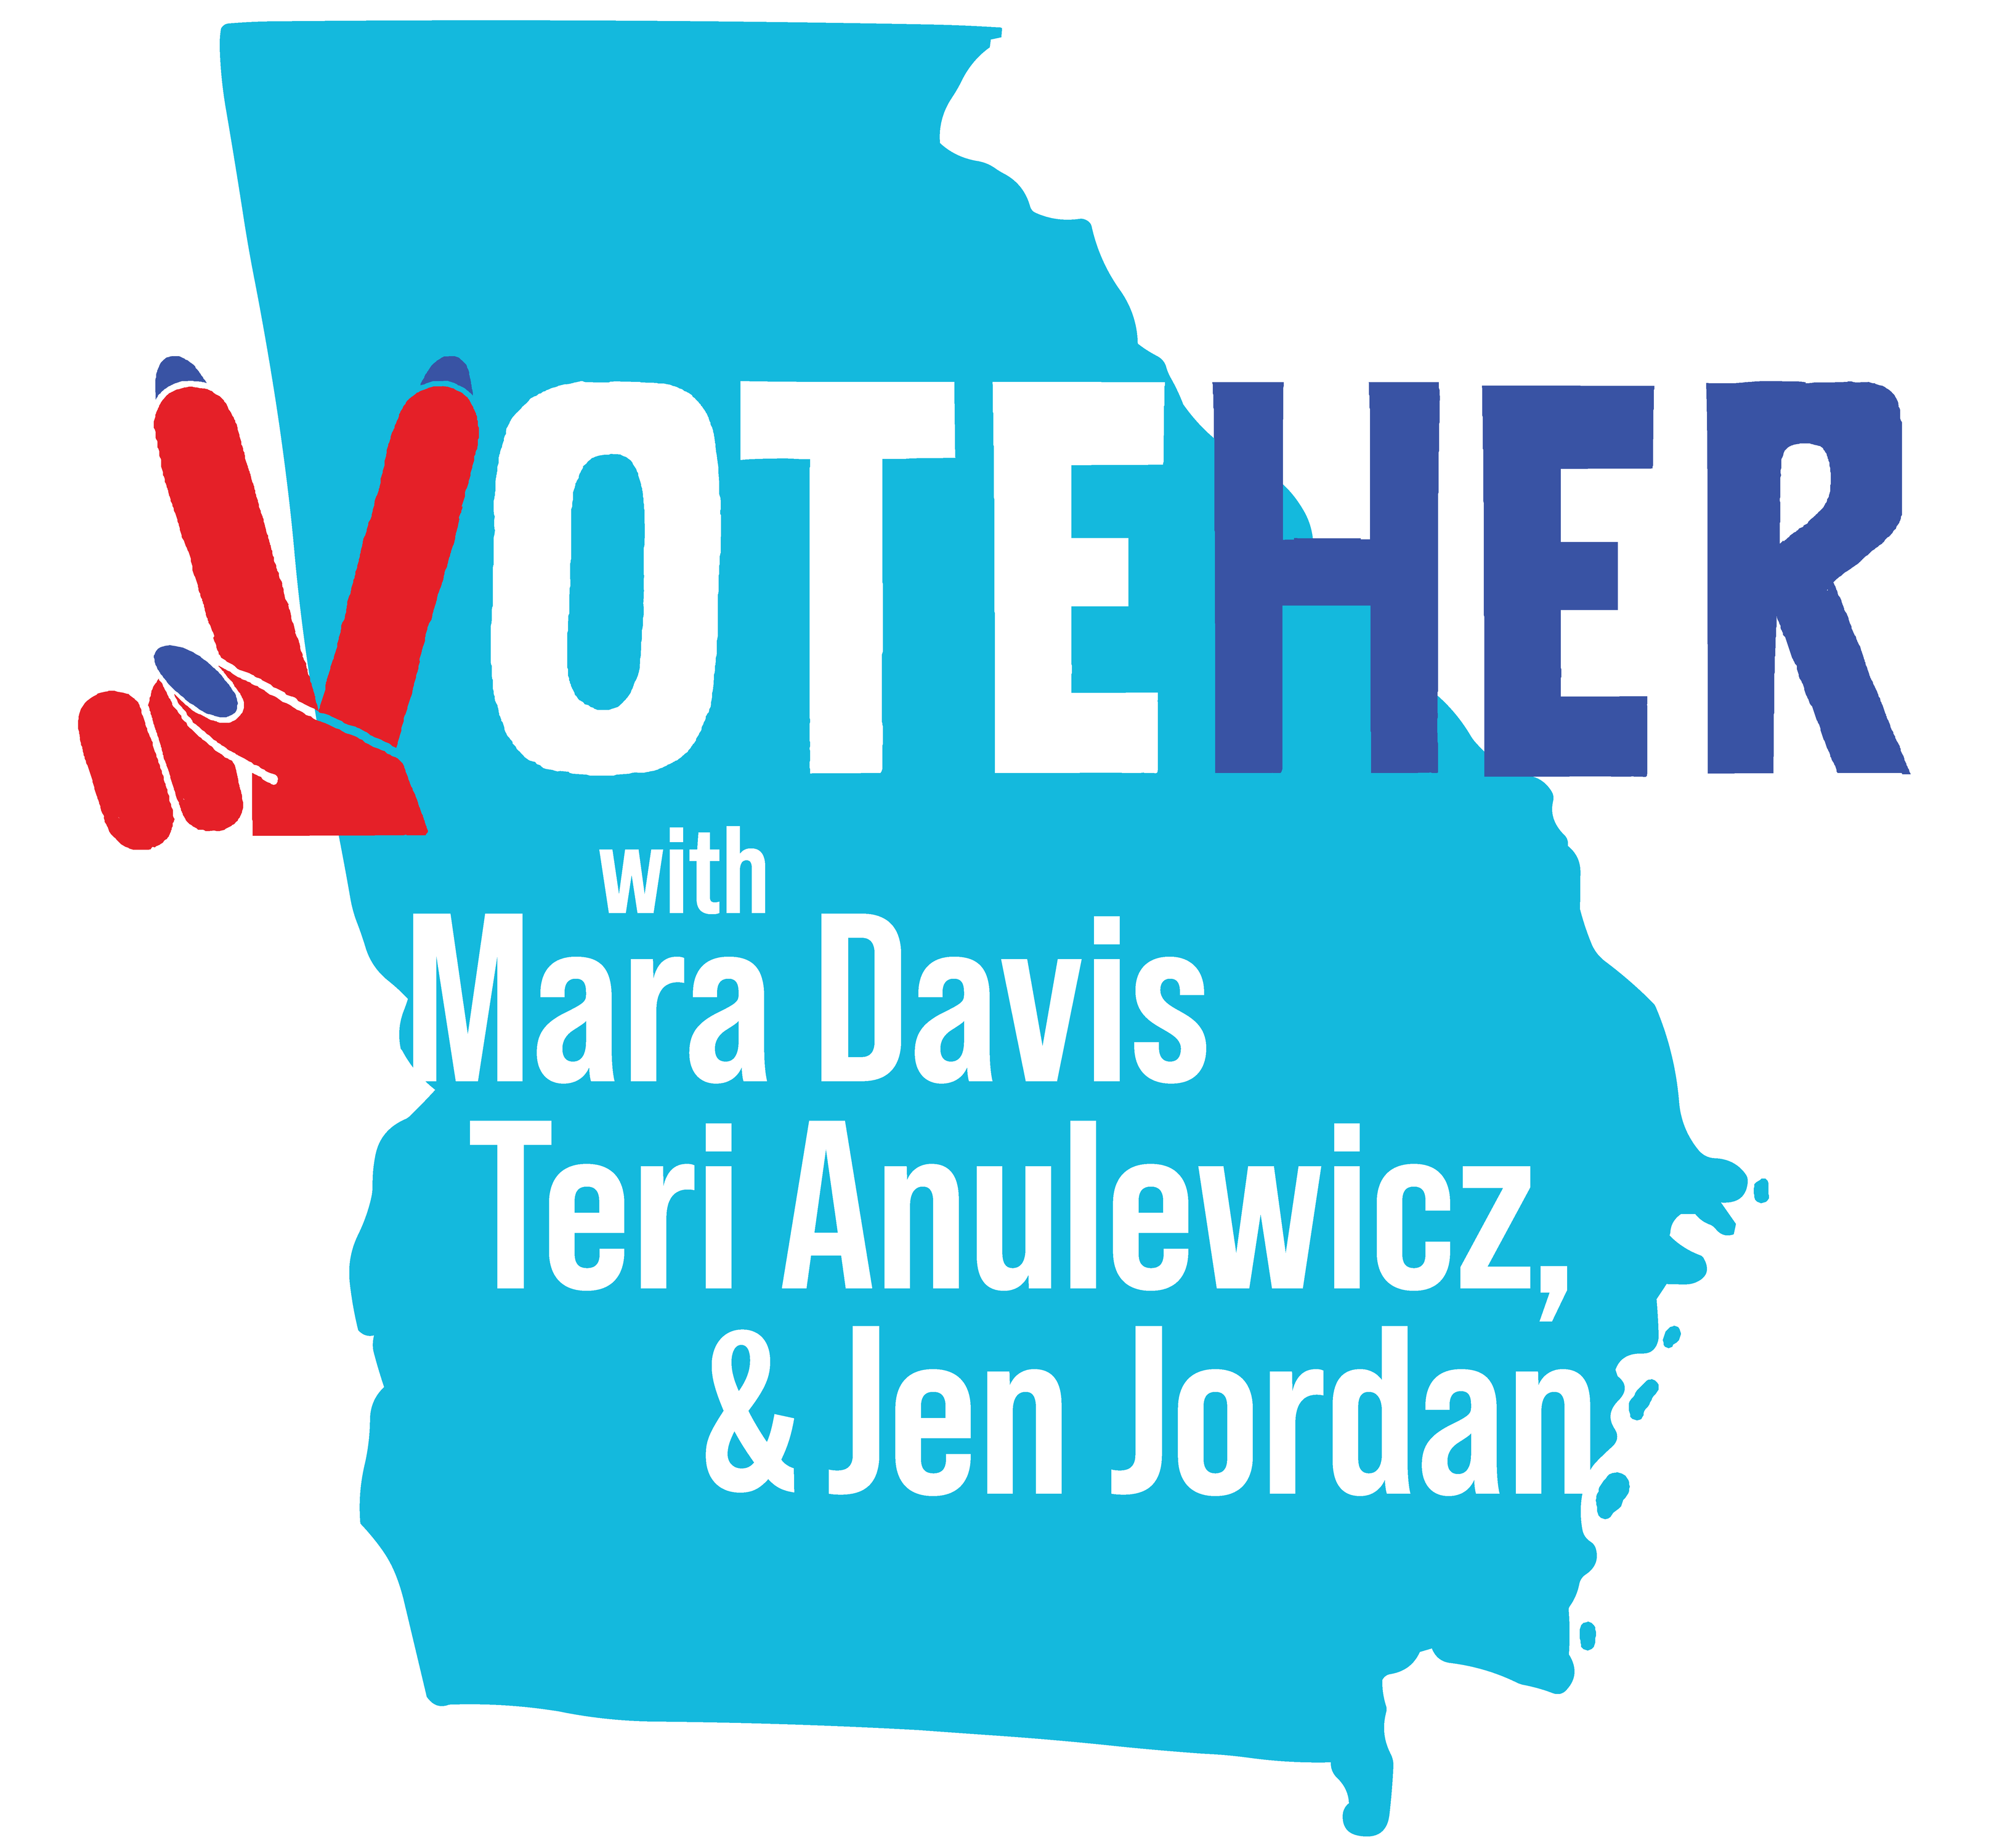 Episode 7 "A VoteHer Guide to Voting in Georgia"